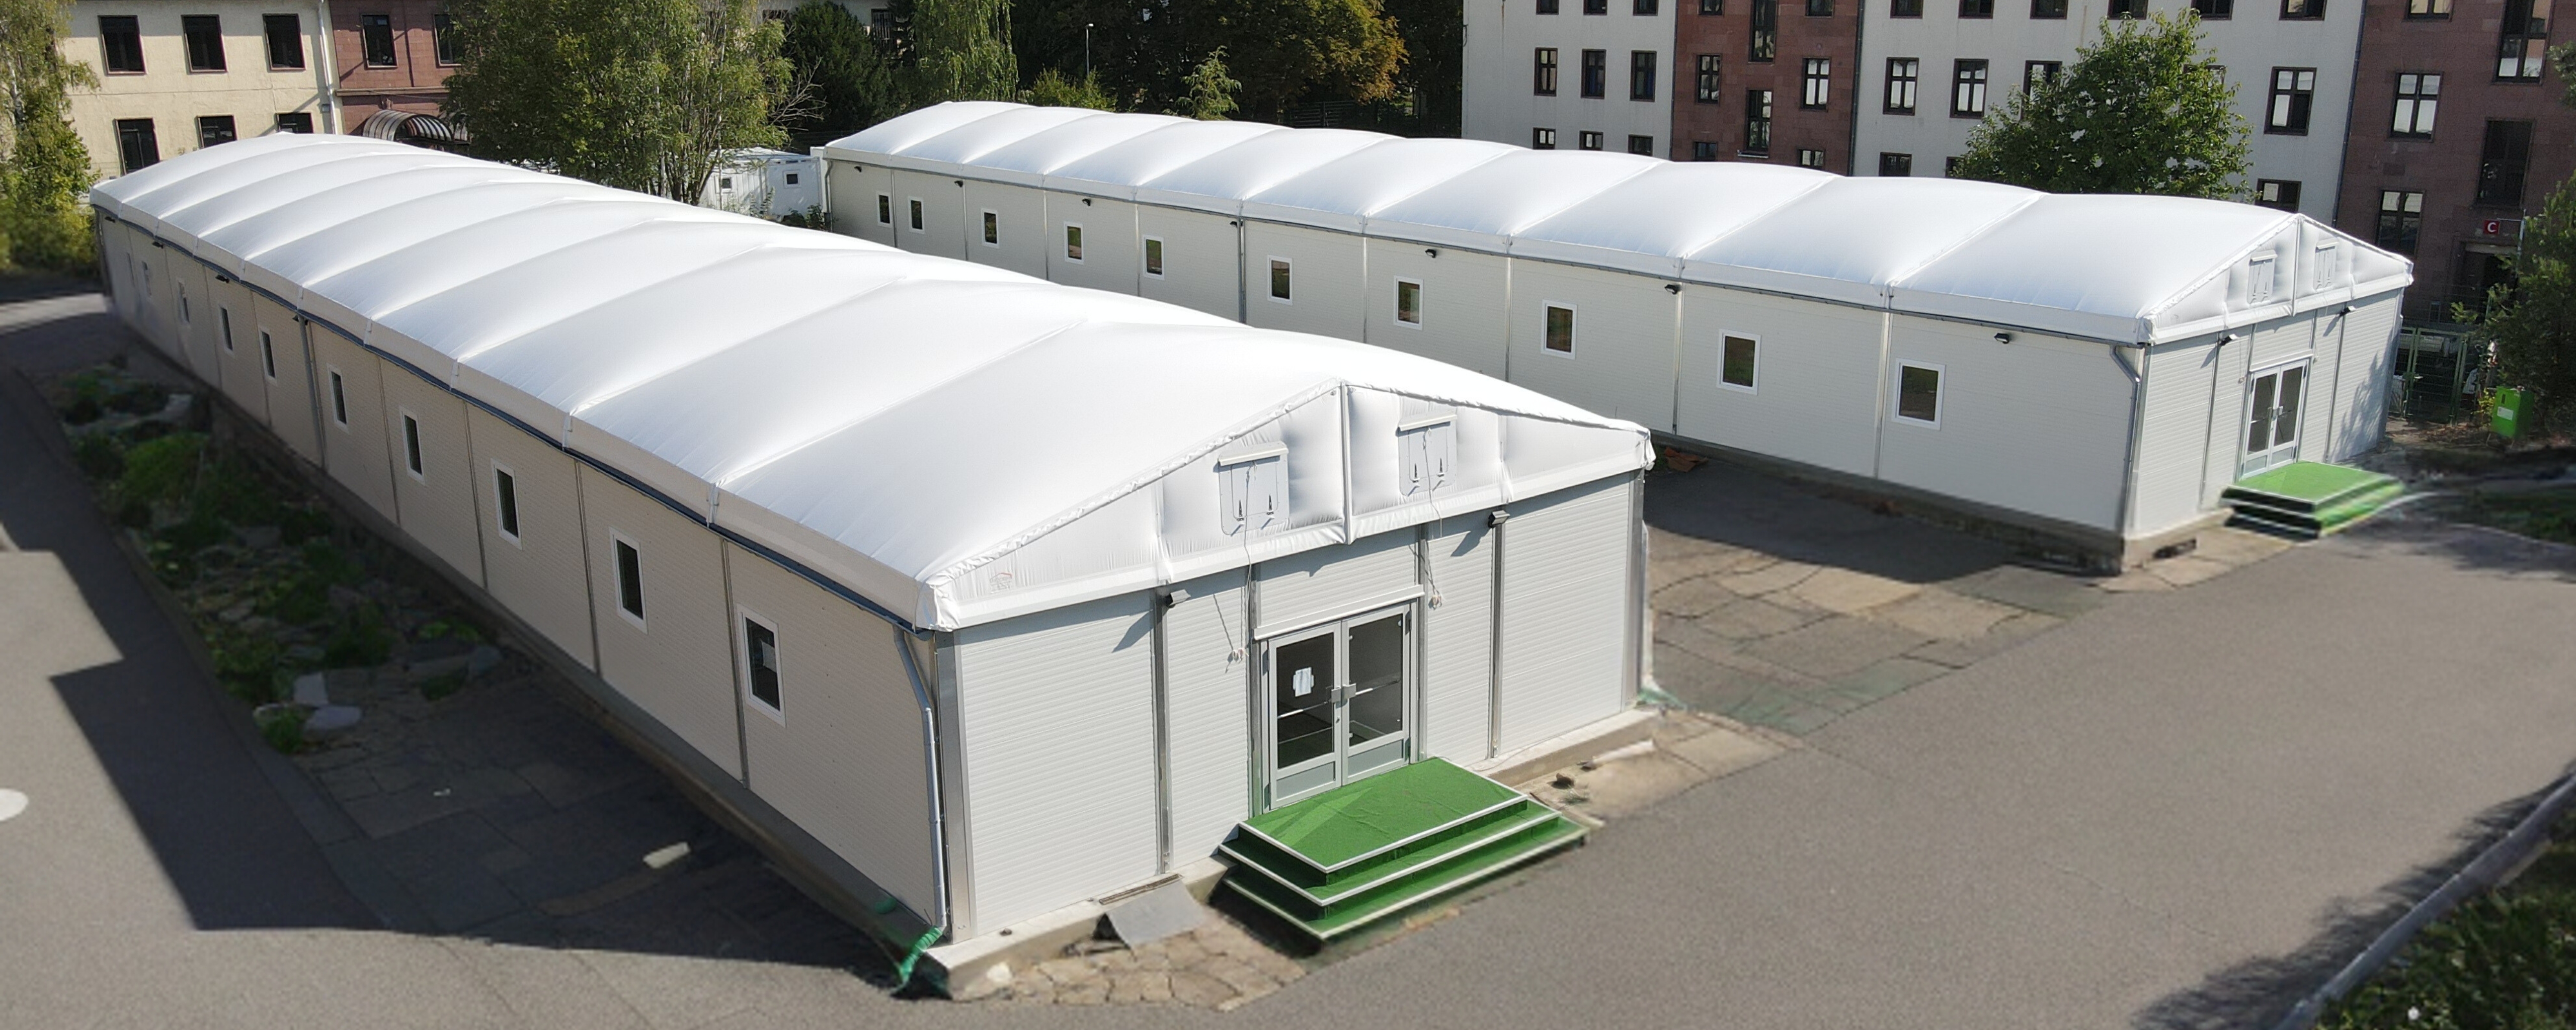 Top view of two RÖDER M-line multifunctional halls used as accommodation for refugees